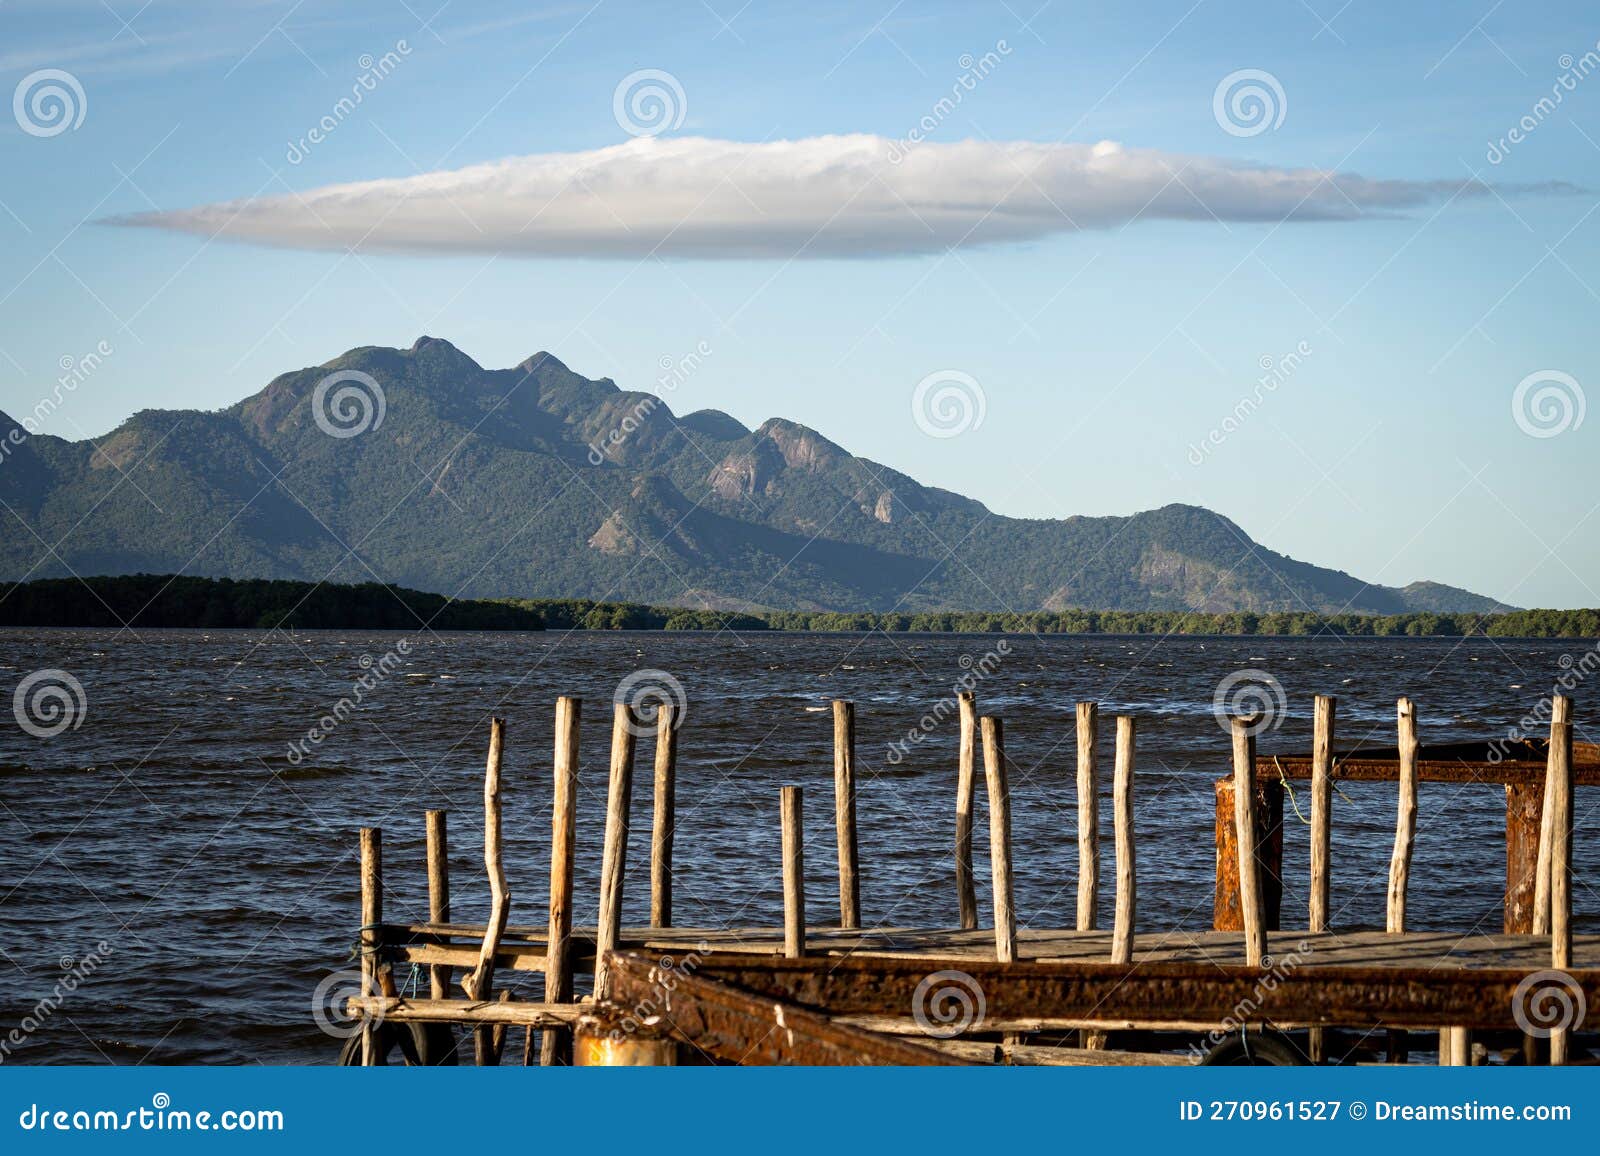 mountain of mestre alvaro with cloud in the  of an umbrella, wooden pier in the foreground